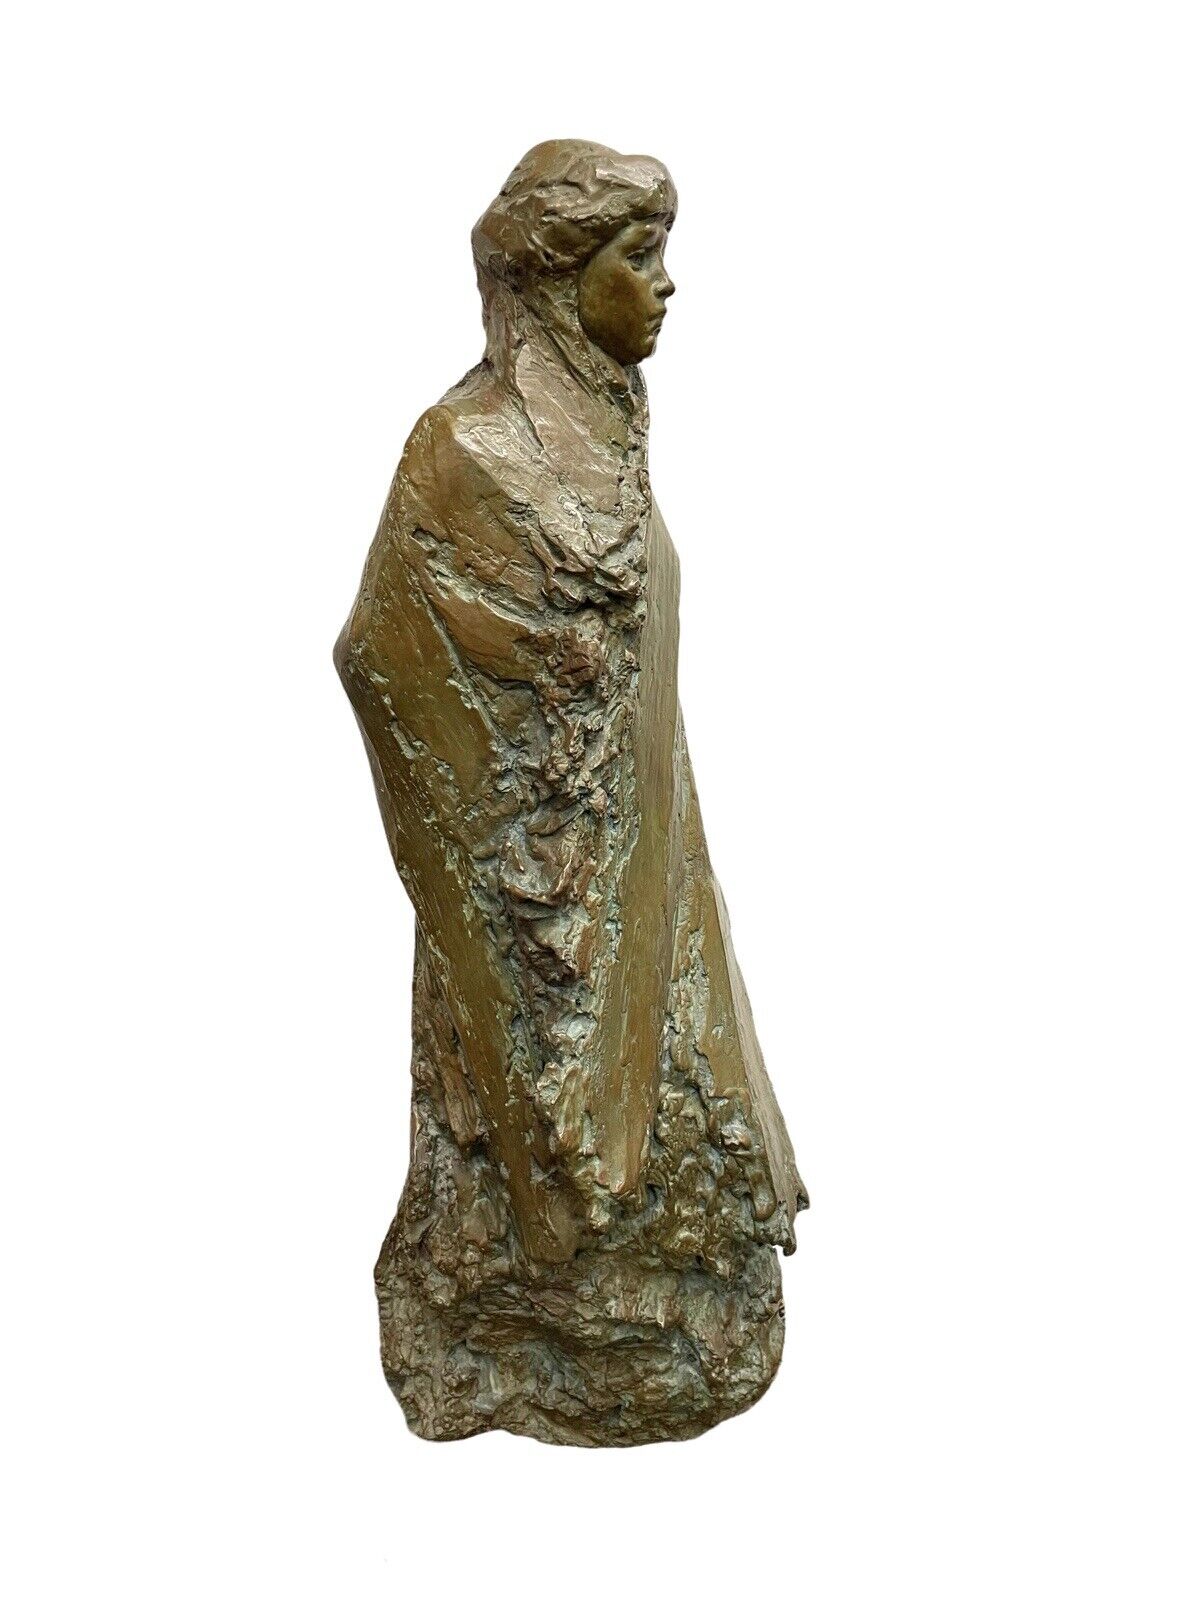 Bronze Statue by Roberta Baskin Shefrin Signed and Numbered 14/18 Dated '91 